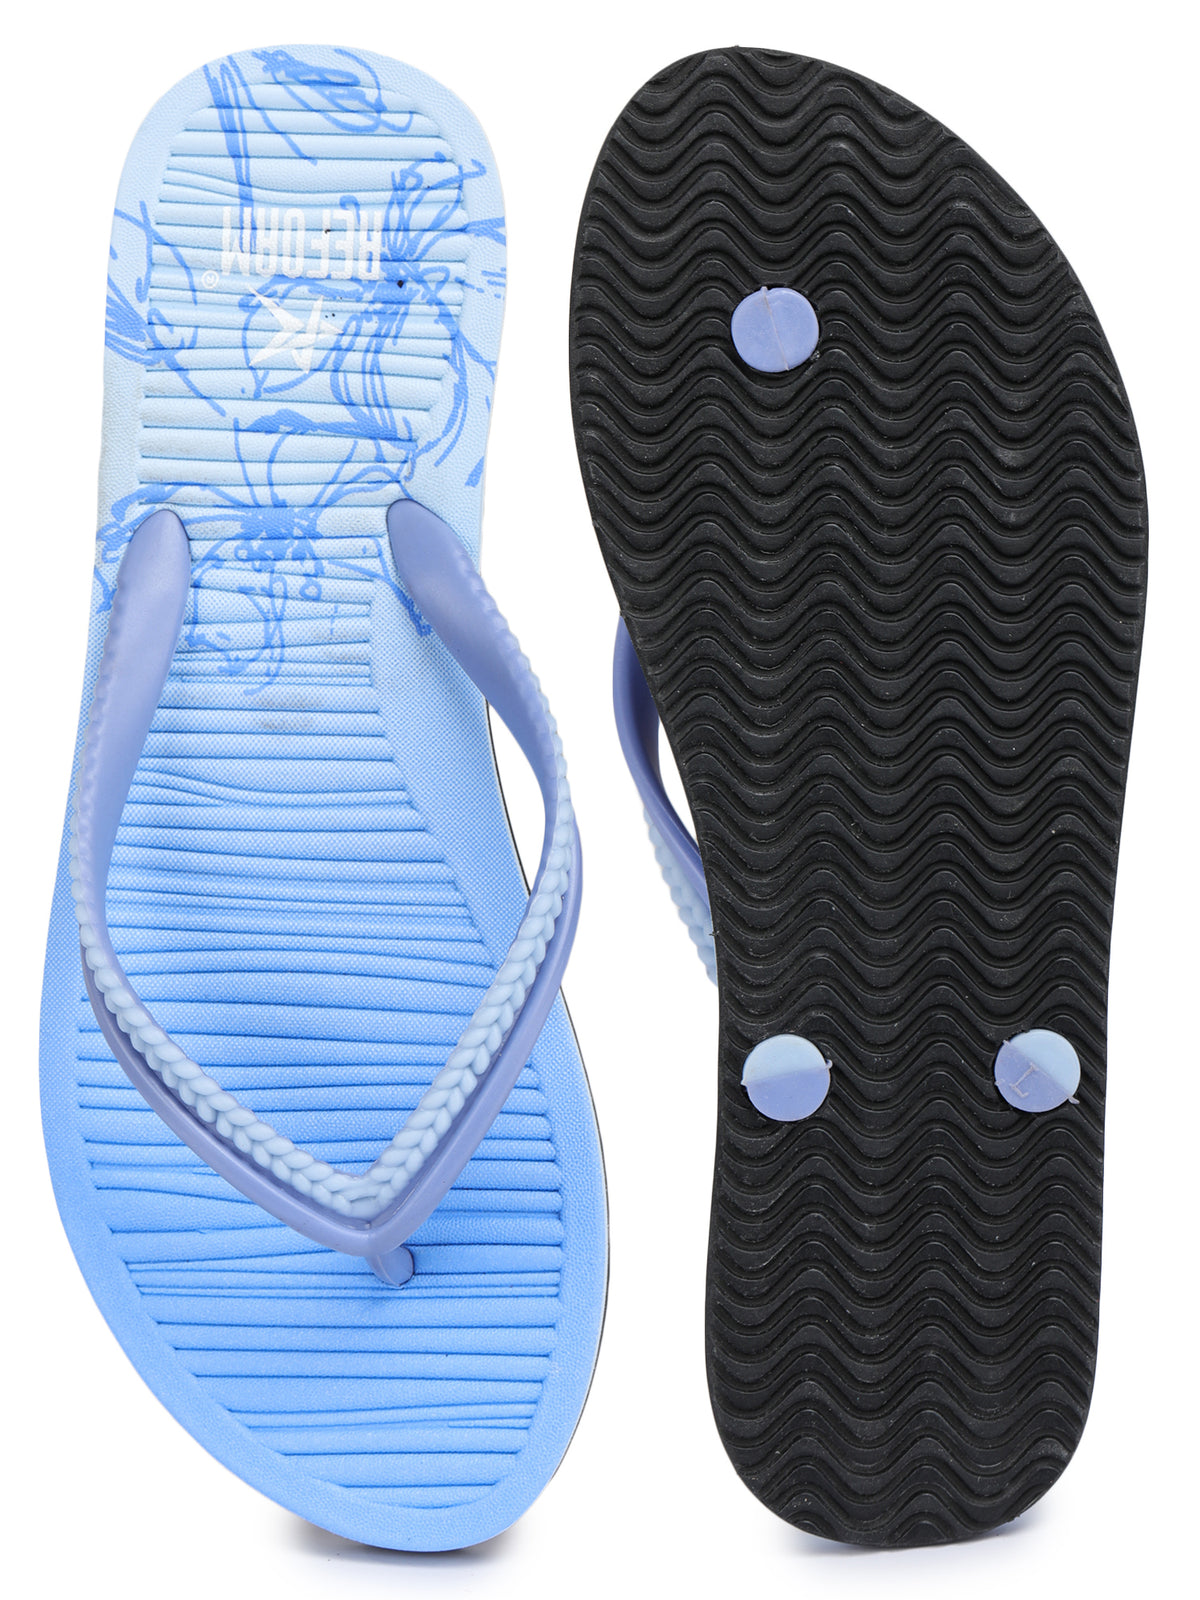 Blue Solid Rubber Slip On Casual Slippers For Women